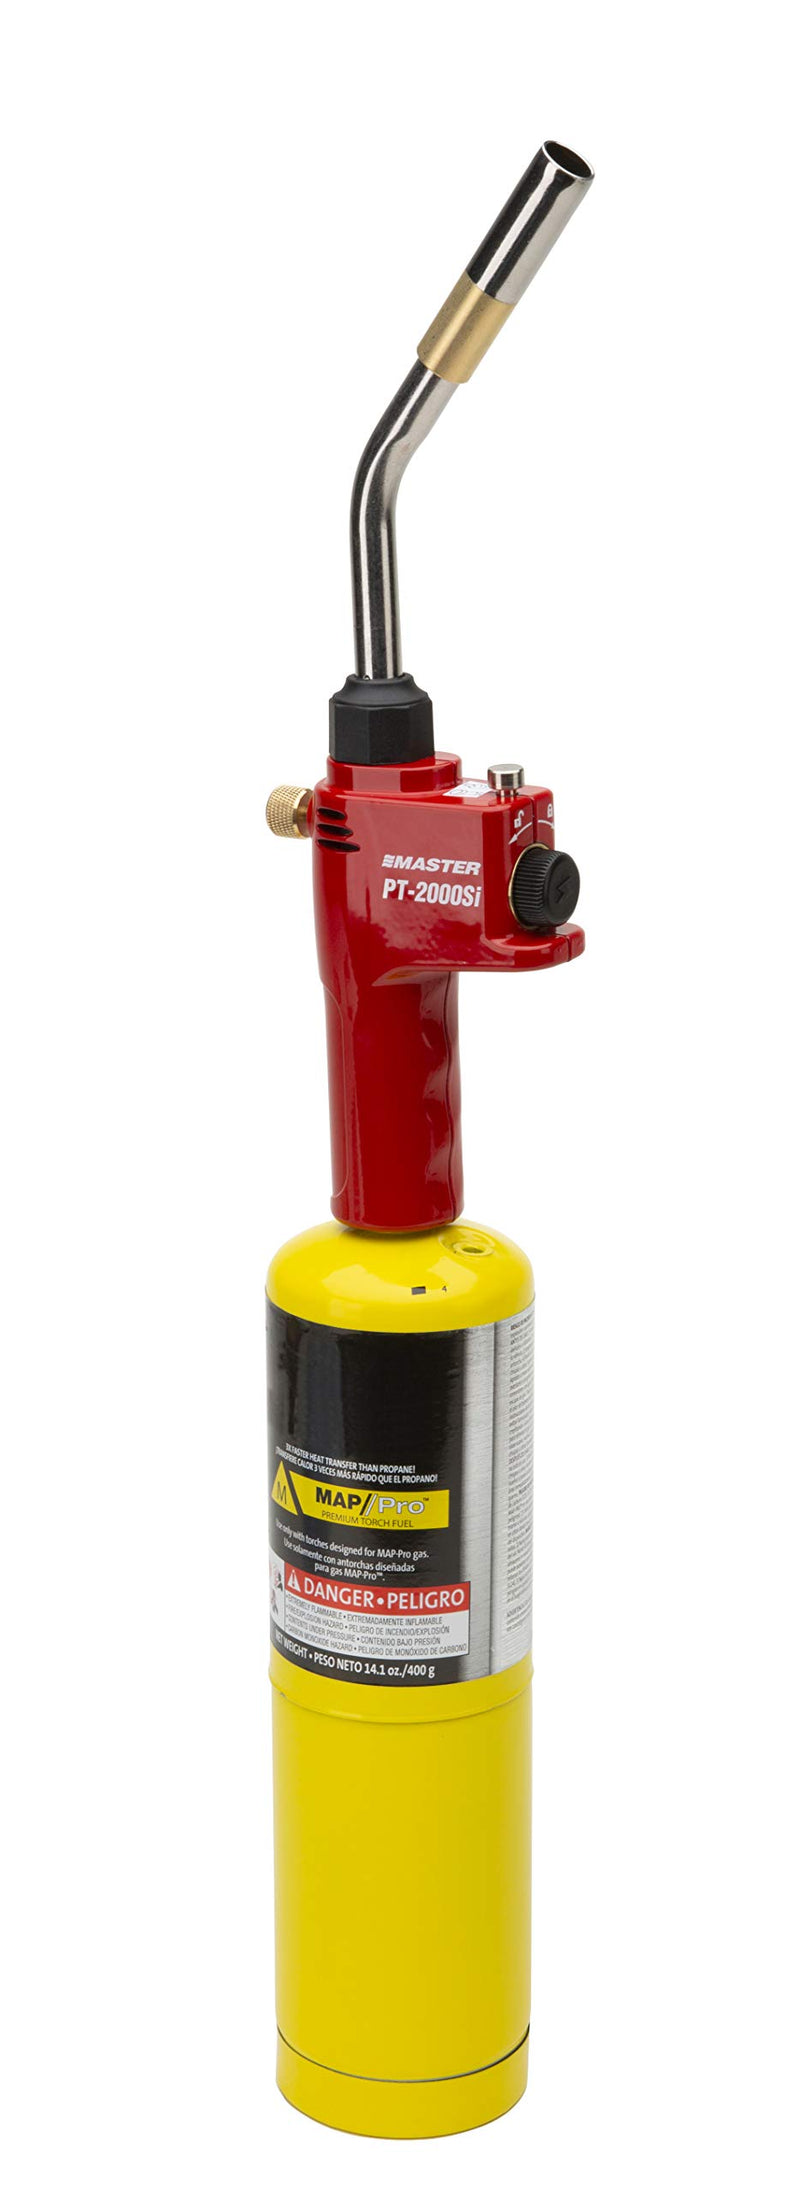  [AUSTRALIA] - Master Appliance PT-2000Si – Optimized High Intensity Adjustable Flame, Trigger Start, Heavy Duty Blow Torch Head, Compatible with Propane or Mapp Gas